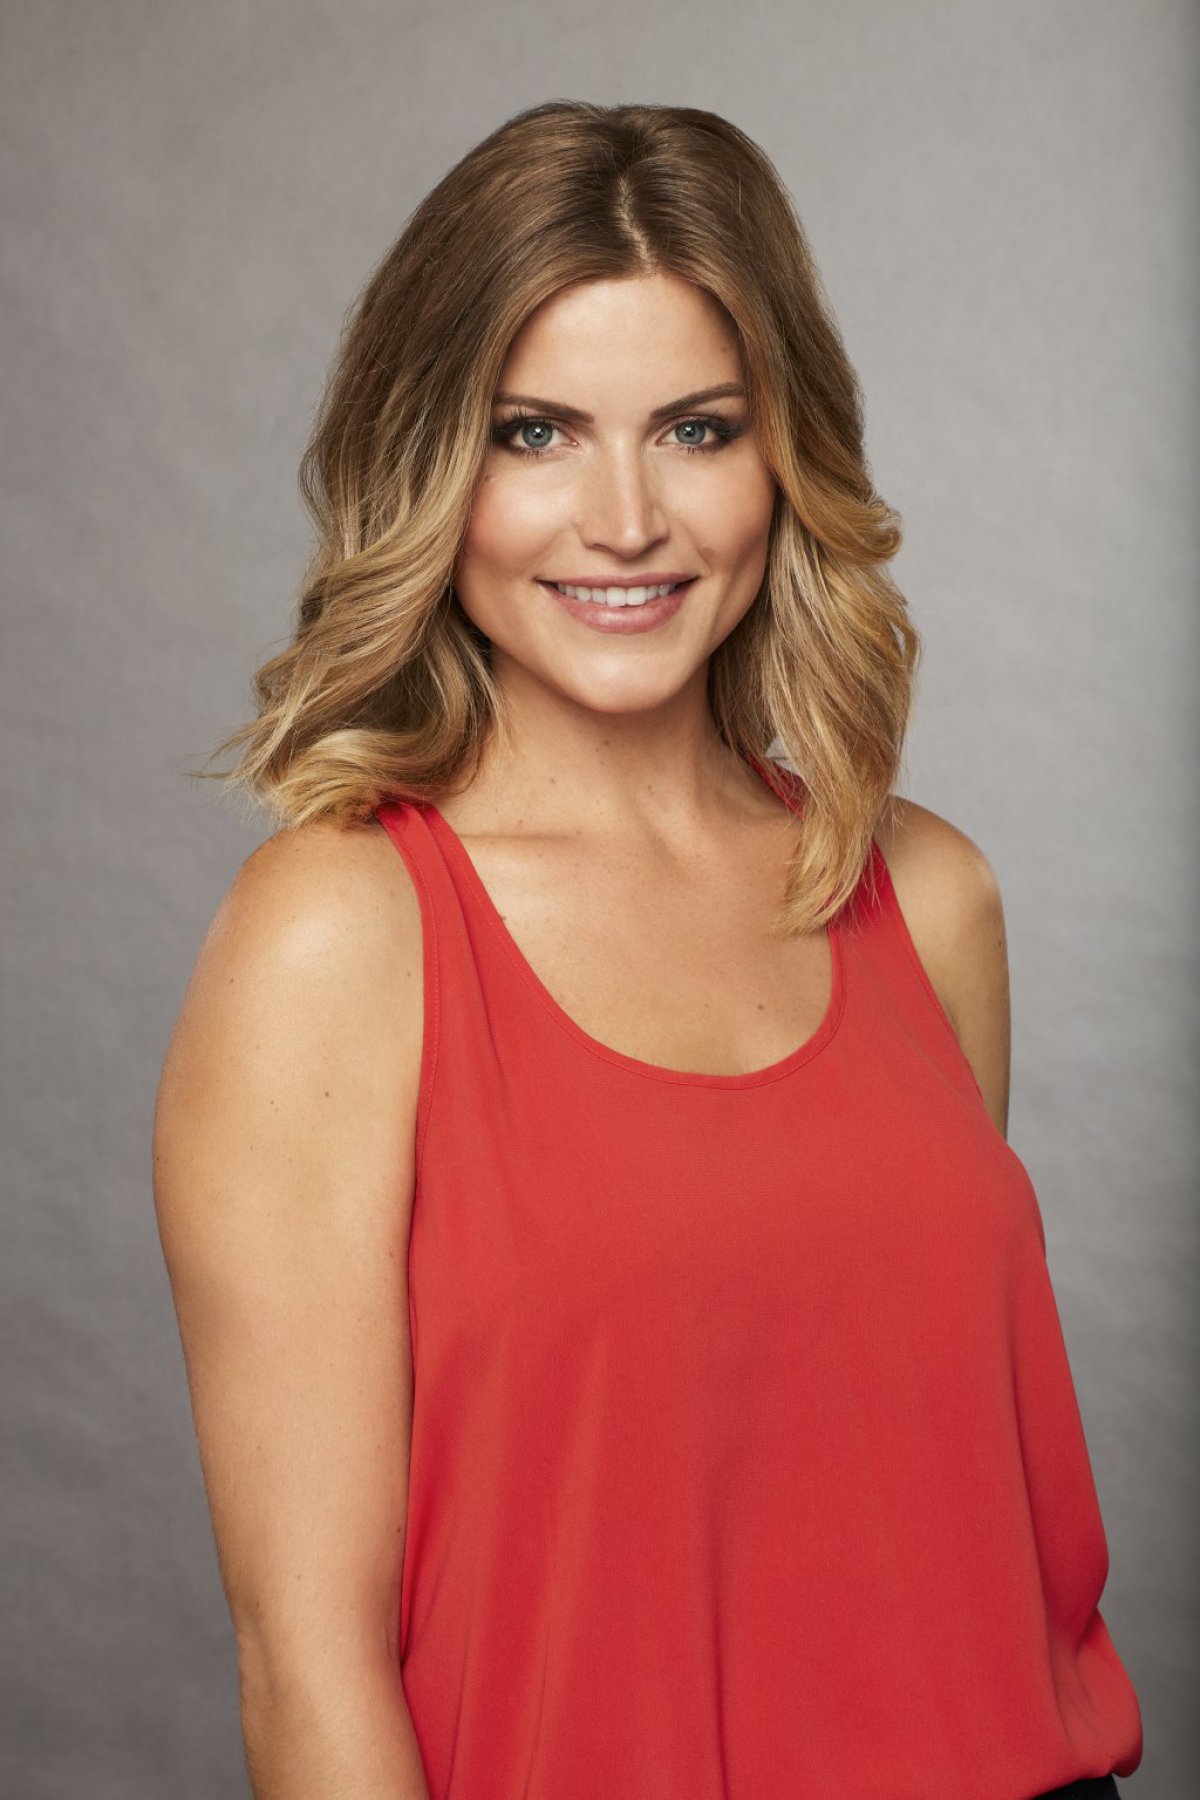 Chelsea Roy 5 Things To Know About Arie Luyendyk Jr S The Bachelor Bachelorette Reality